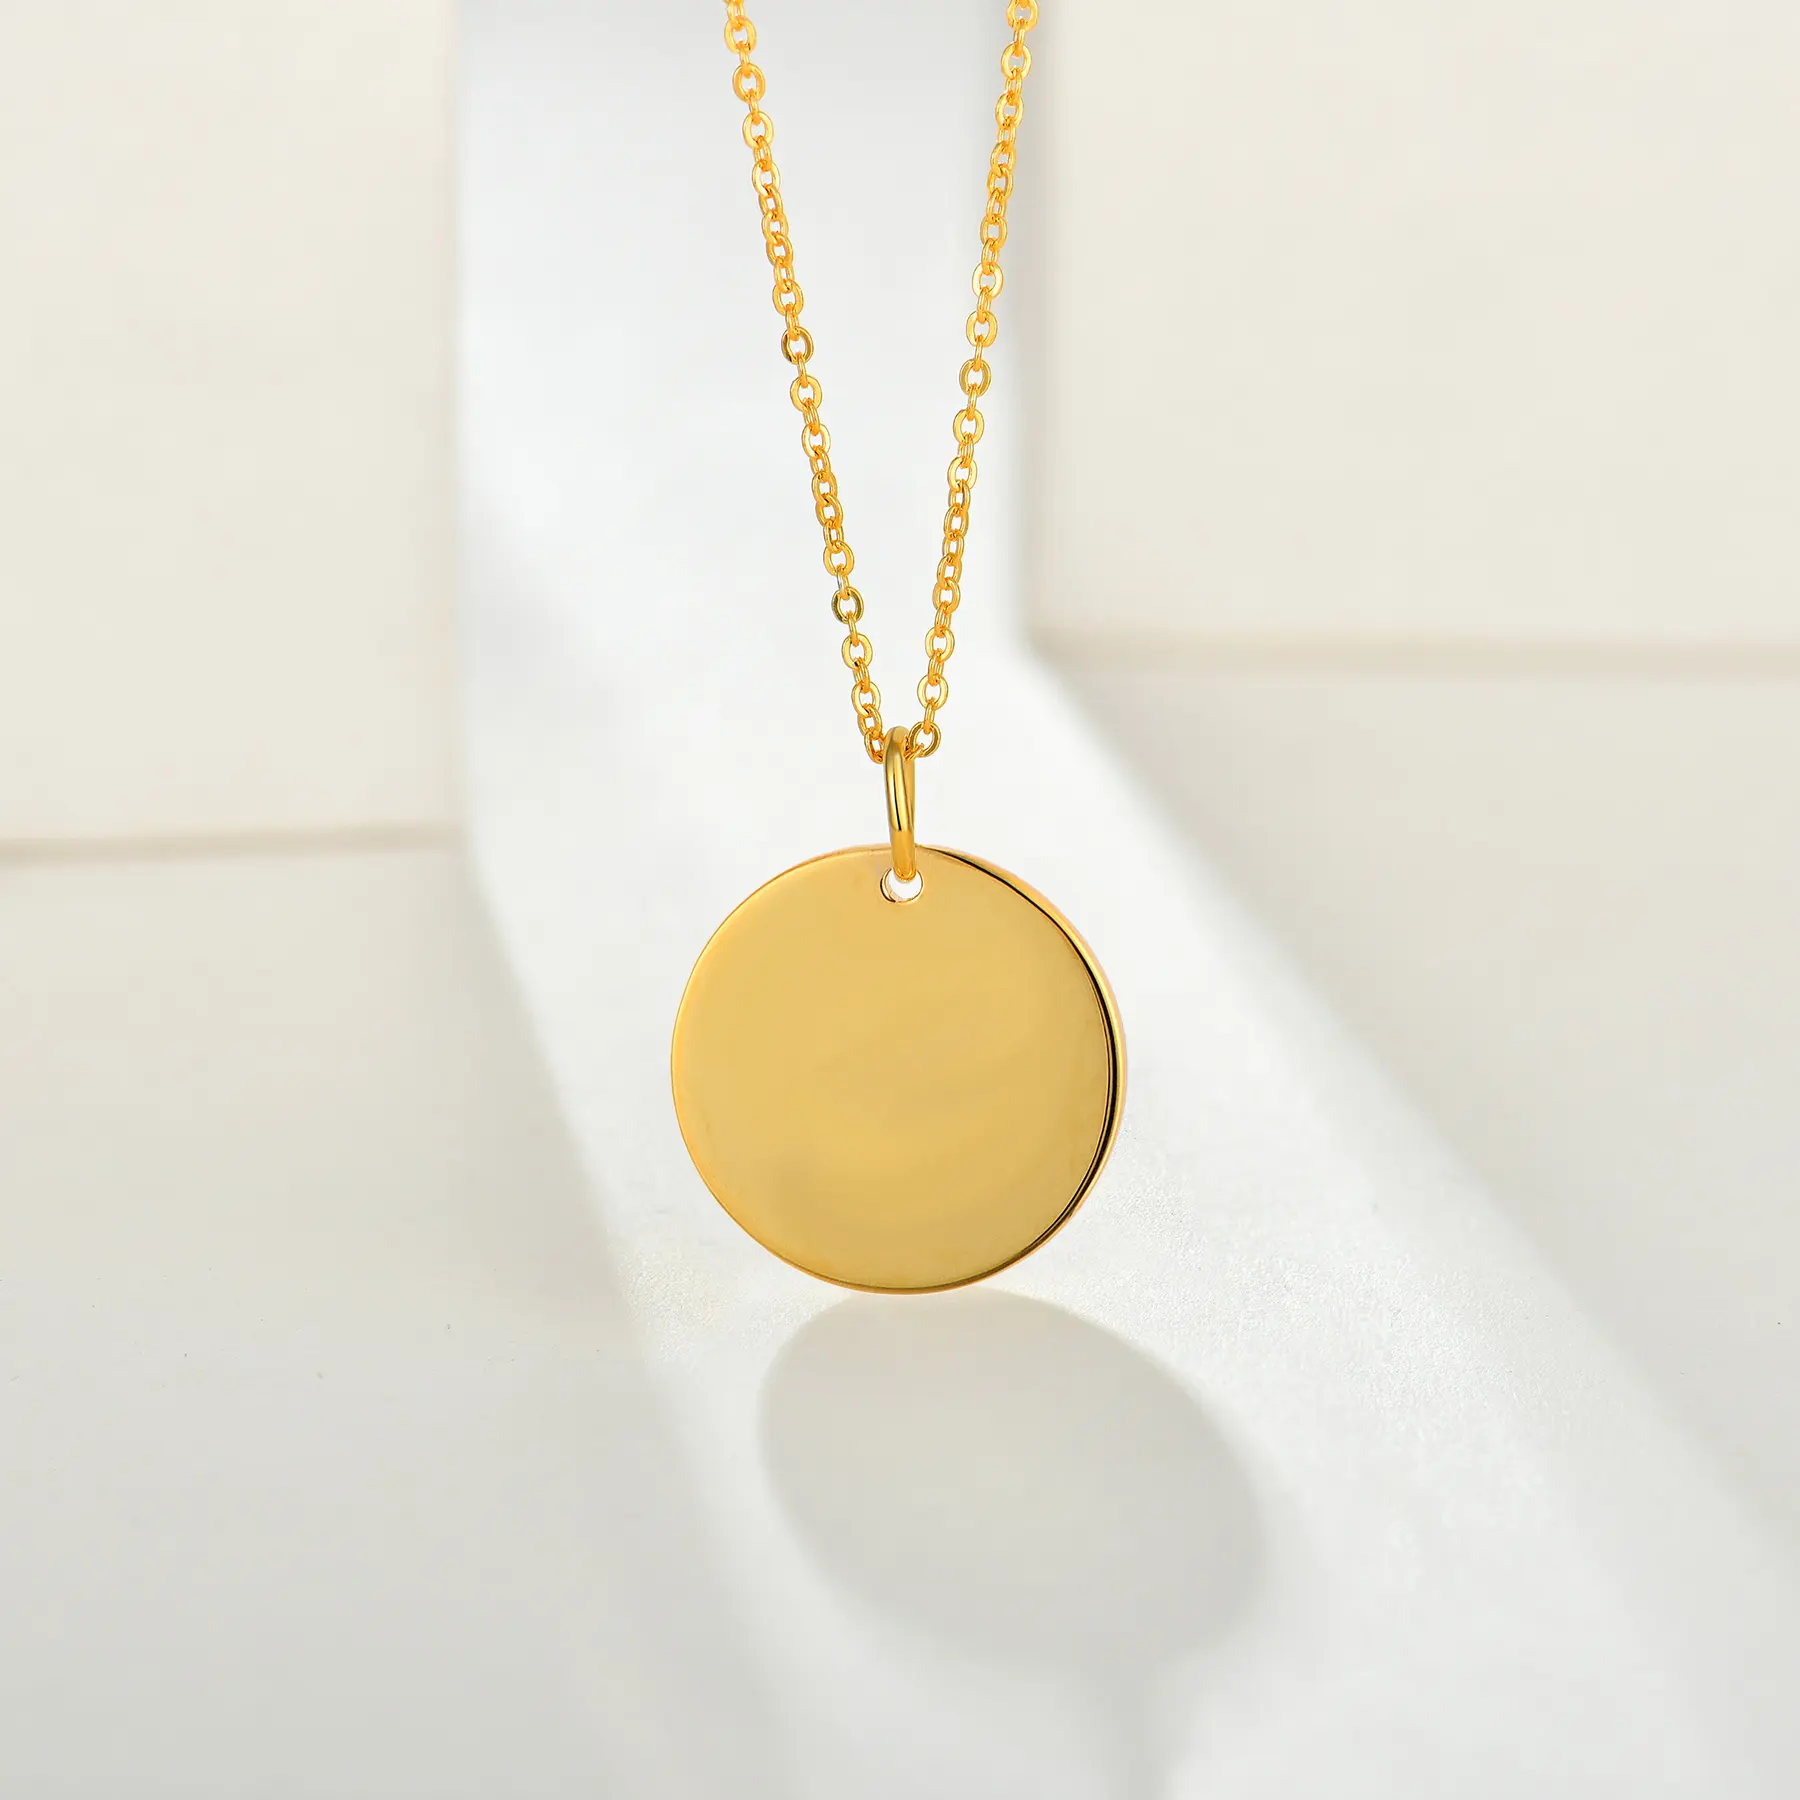 Factory Wholesale Blank Disc Pendant Necklace 925 Silver Round Coin Pendant Necklace Jewelry